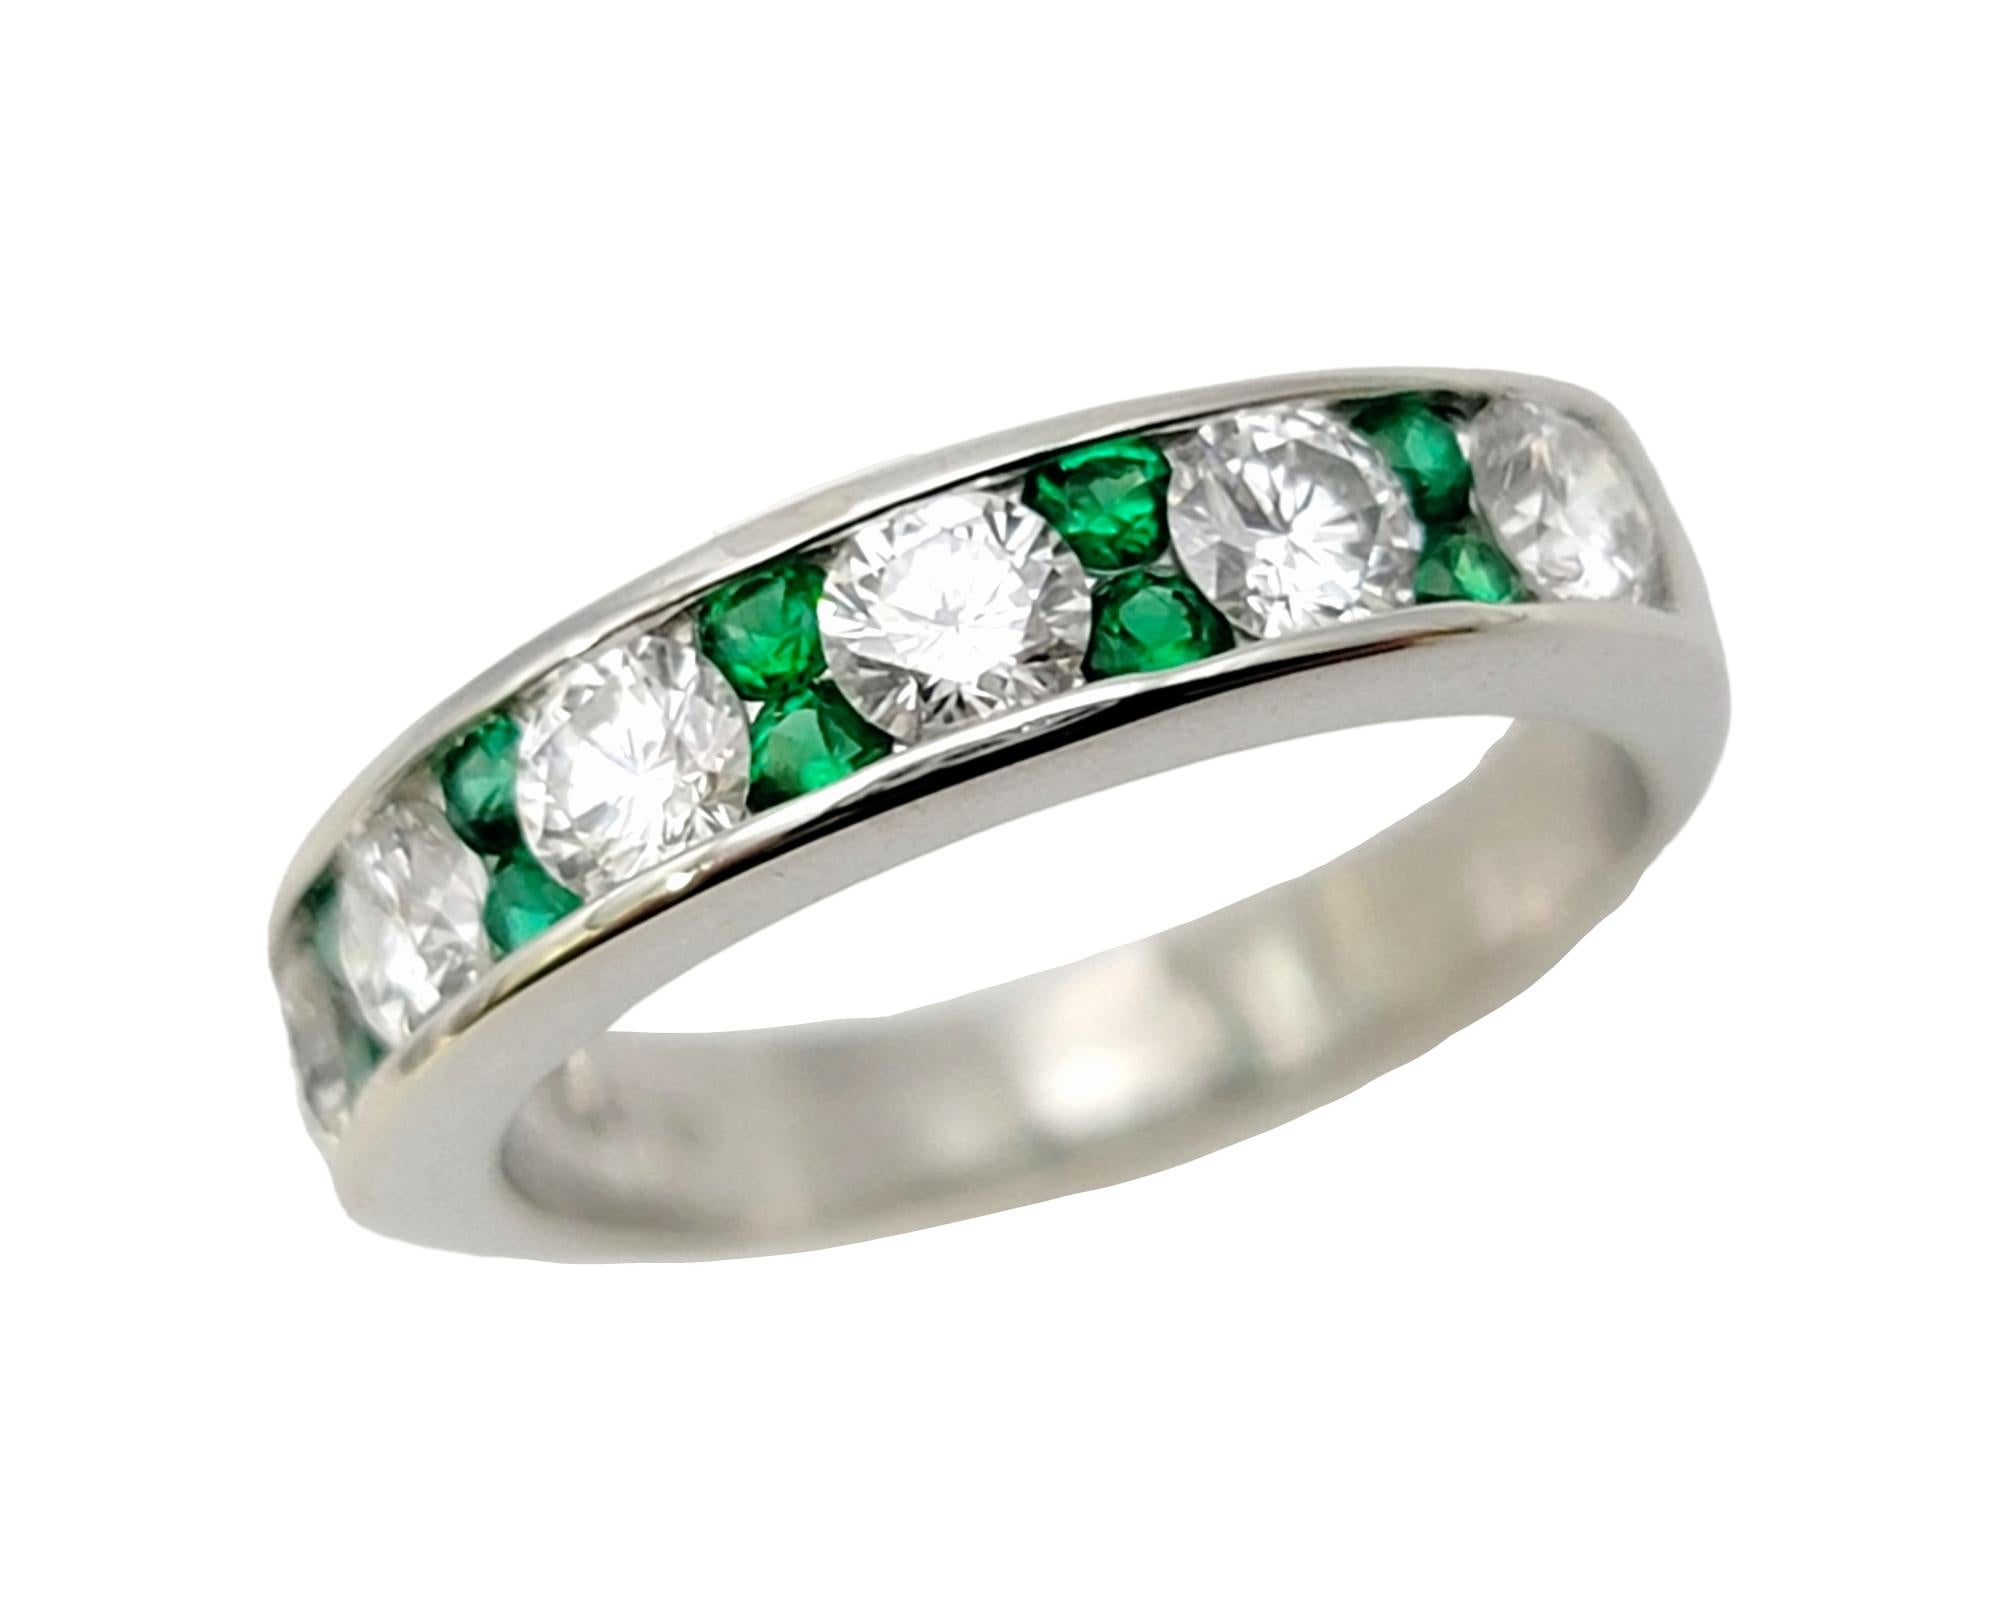 Contemporary Alternating Diamond and Emerald Semi-Eternity Band Ring in Polished Platinum For Sale